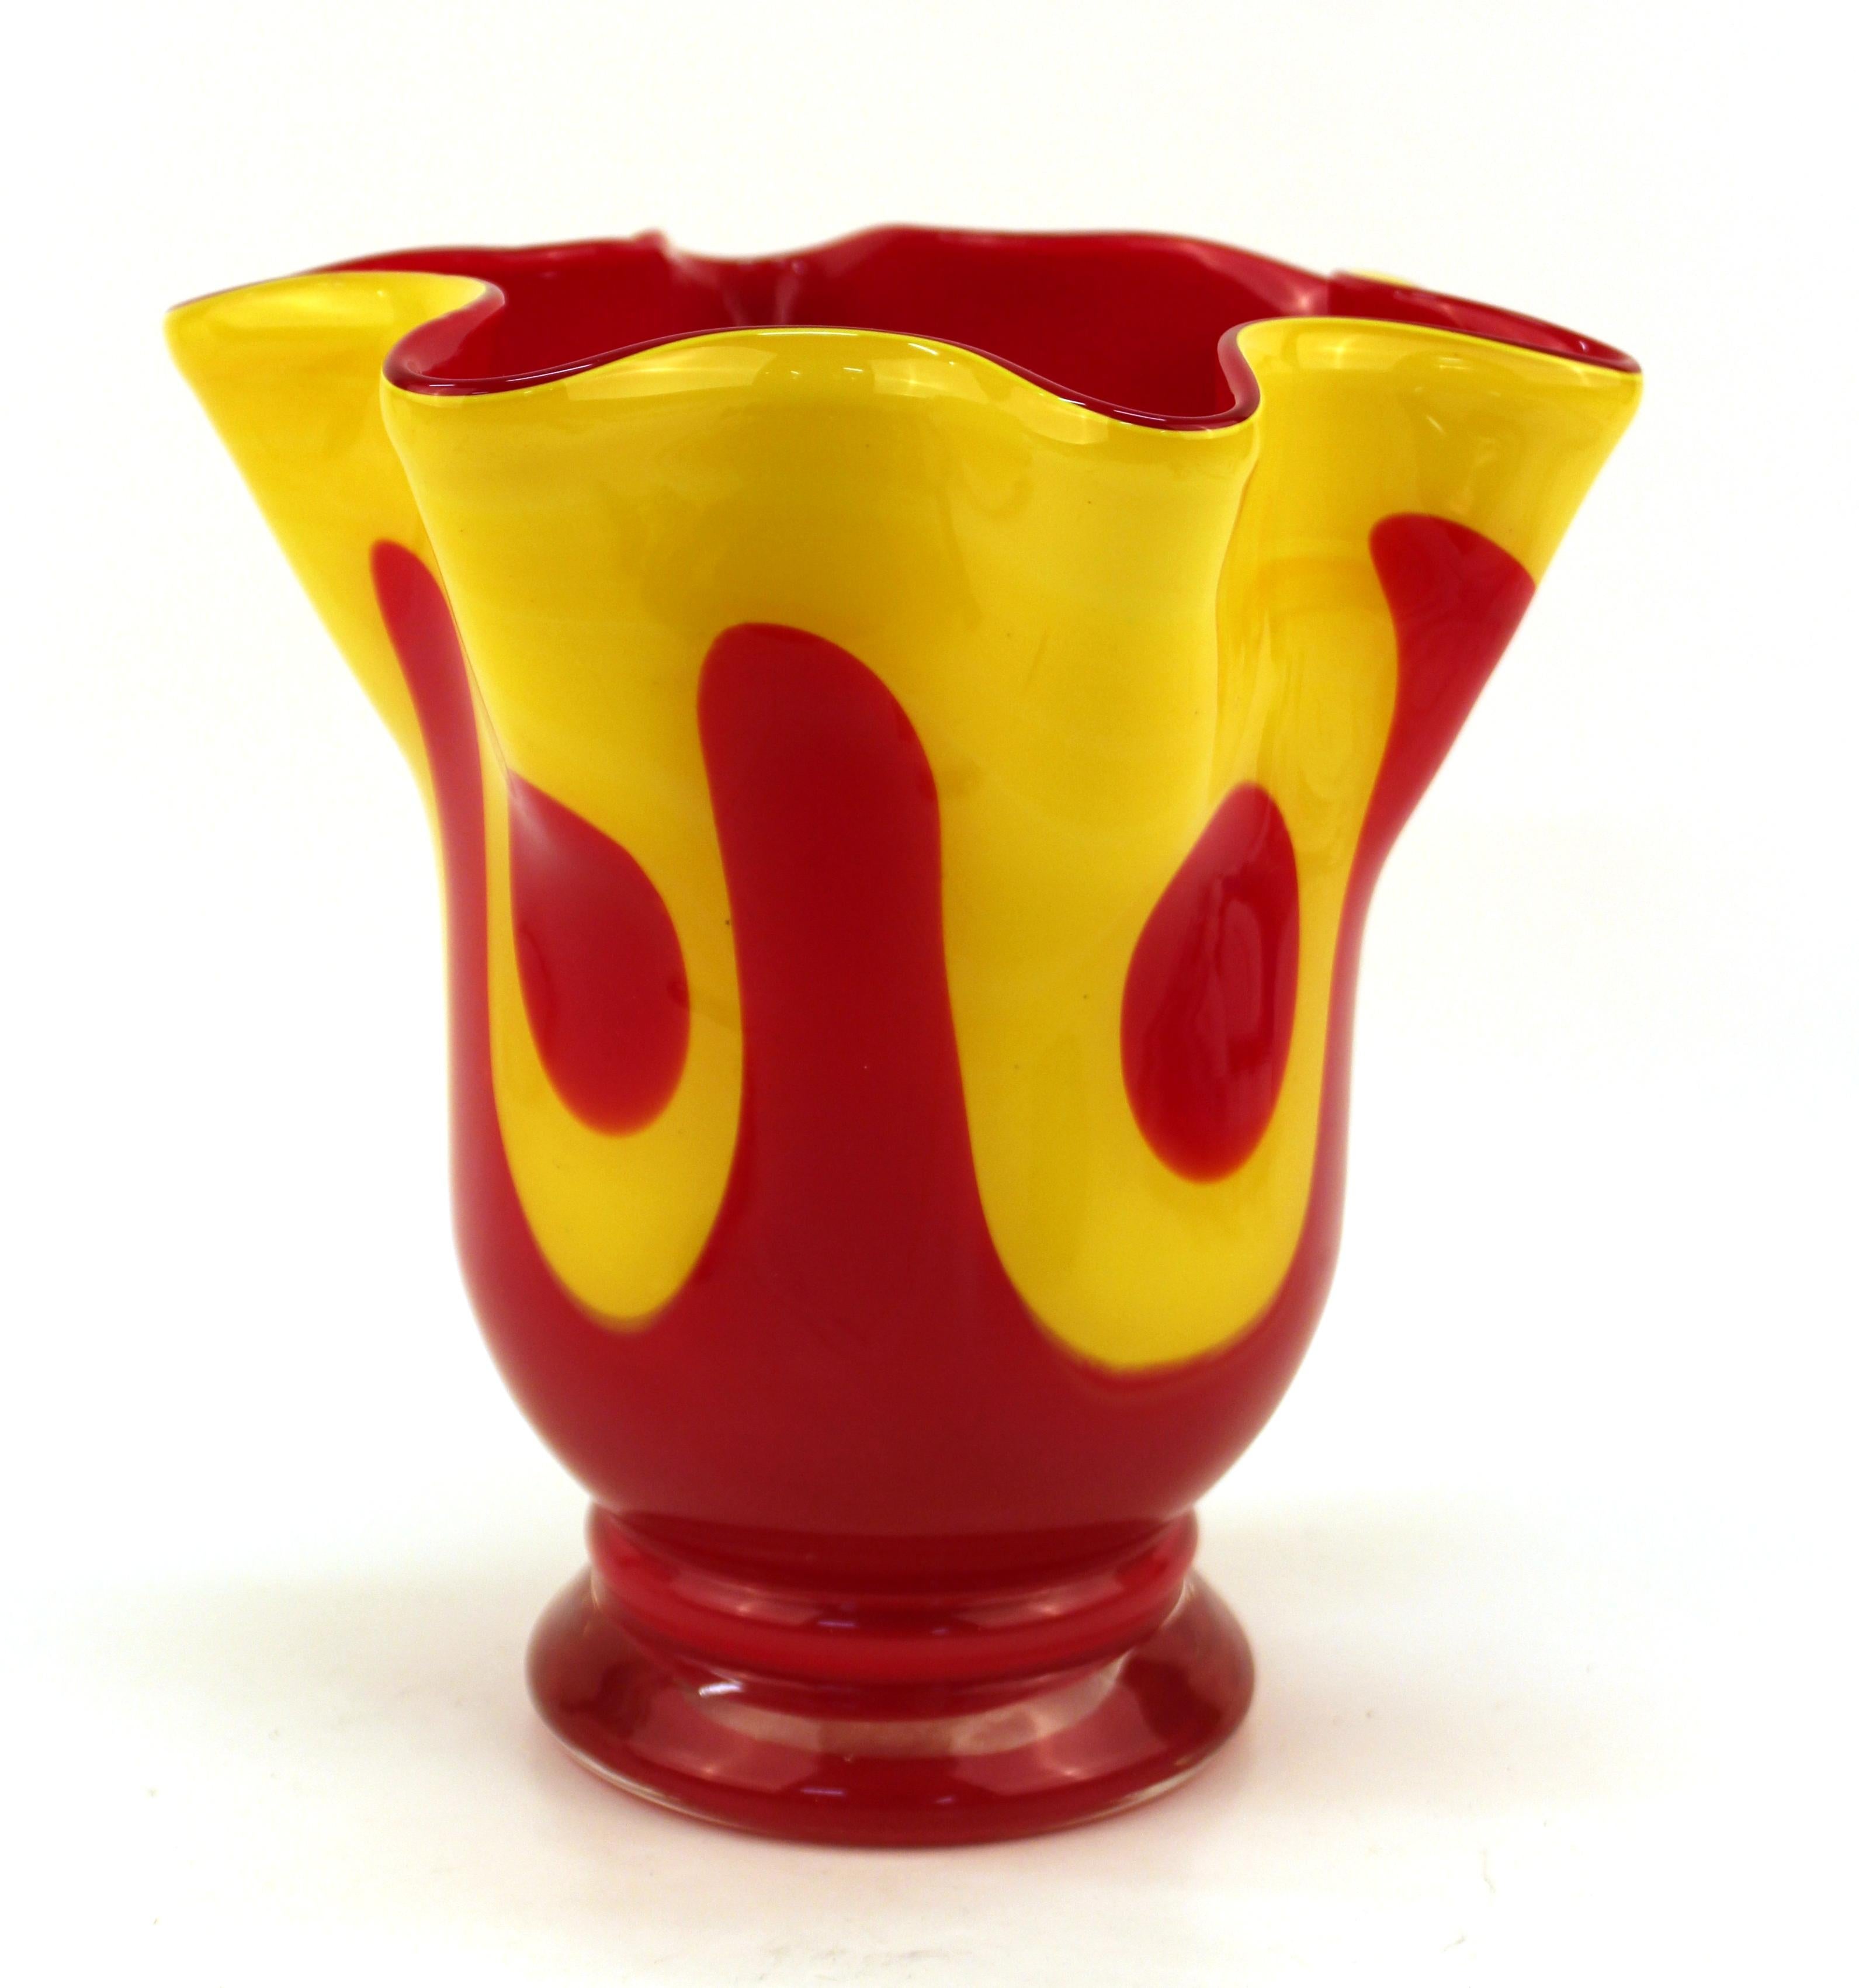 Italian modern art glass vase in shape of a handkerchief, designed in red and yellow glass. The piece is reminiscent of pieces from the Fratelli Toso glass-making company. In great vintage condition with age-appropriate wear and use.